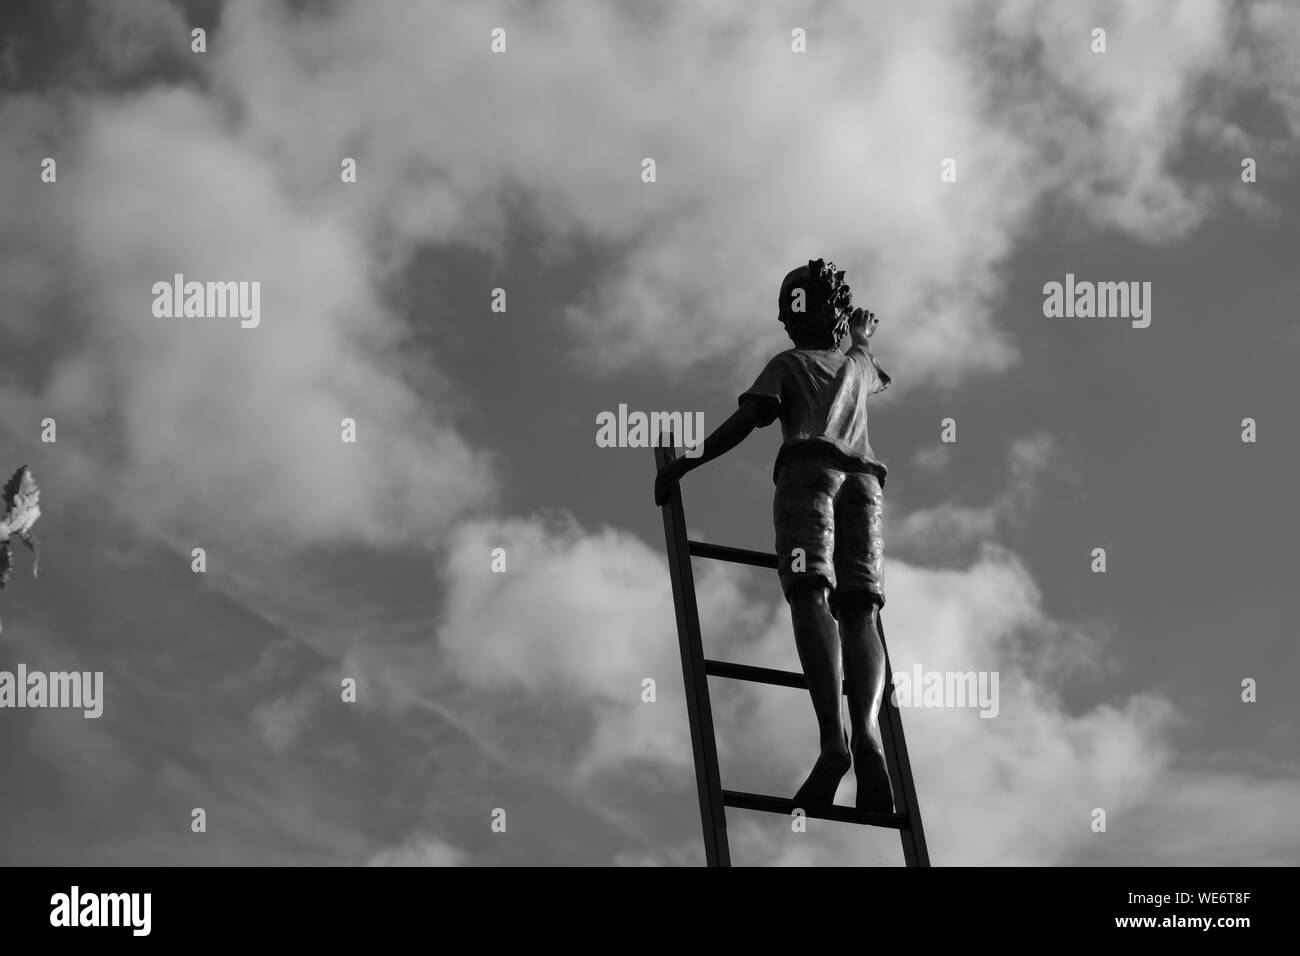 Black and white picture of Lake side statue of boy climbing ladder Stock Photo